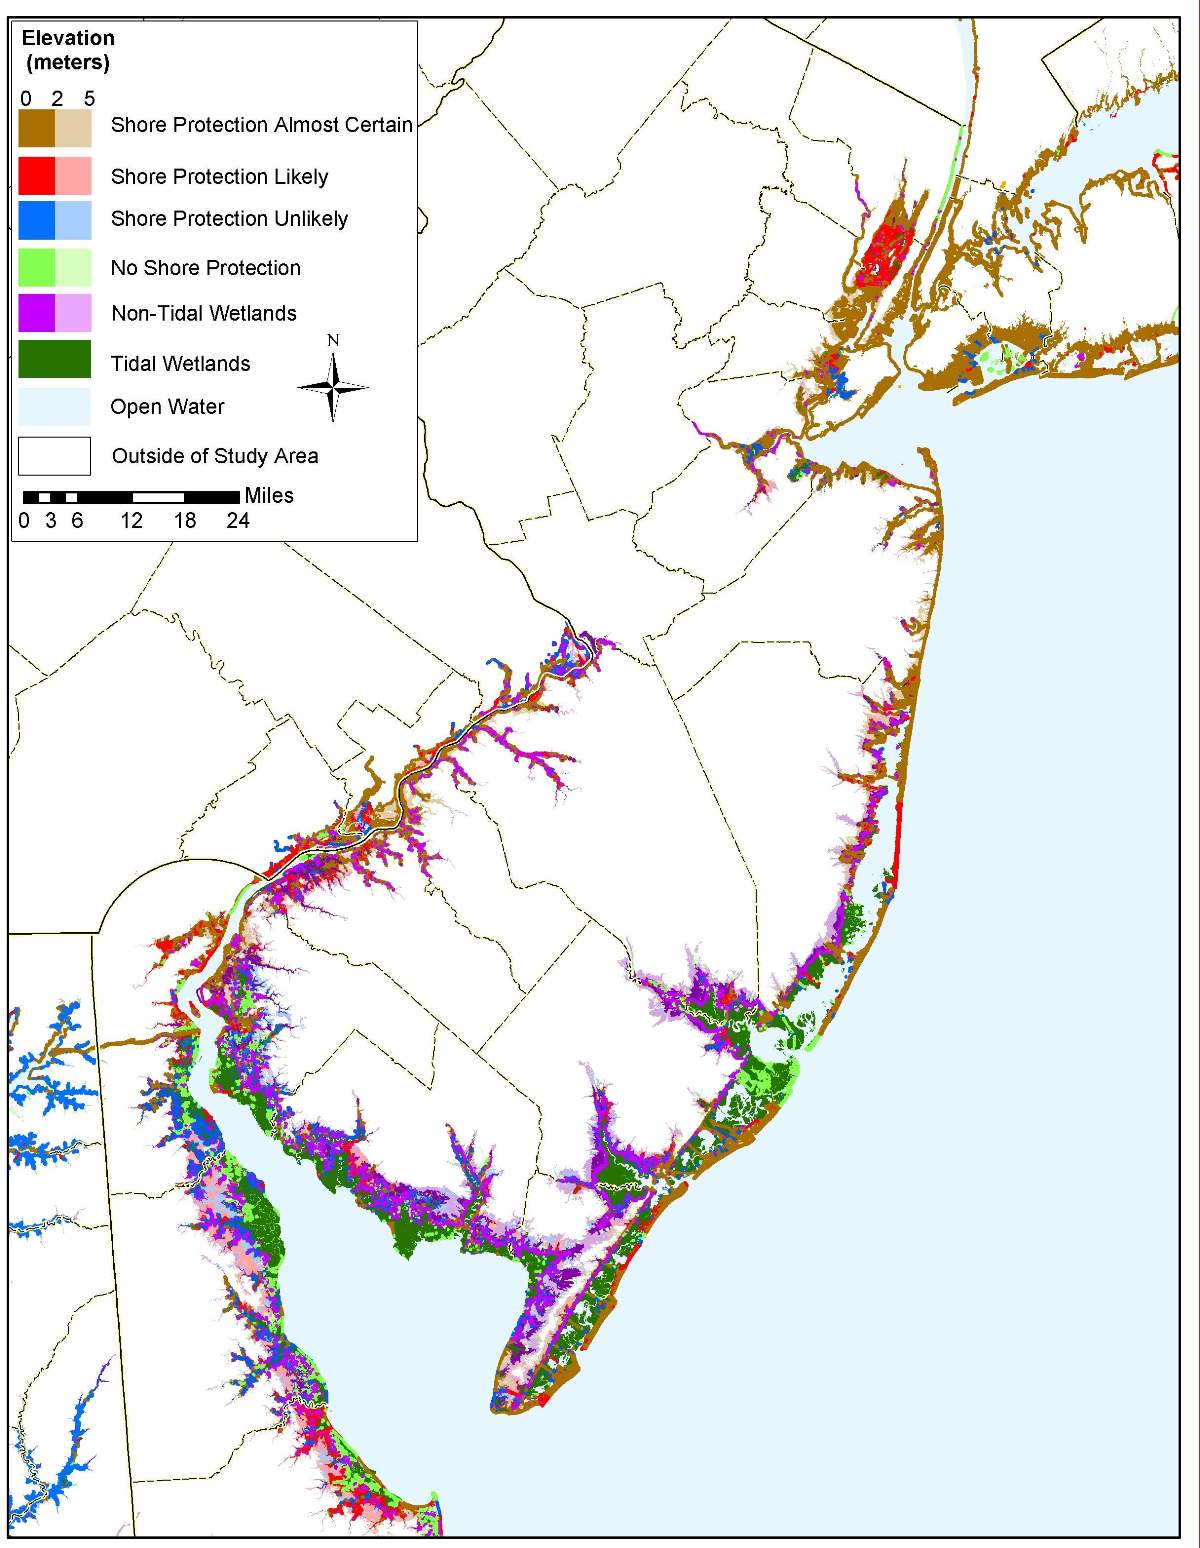 New Jersey sea level rise planning map